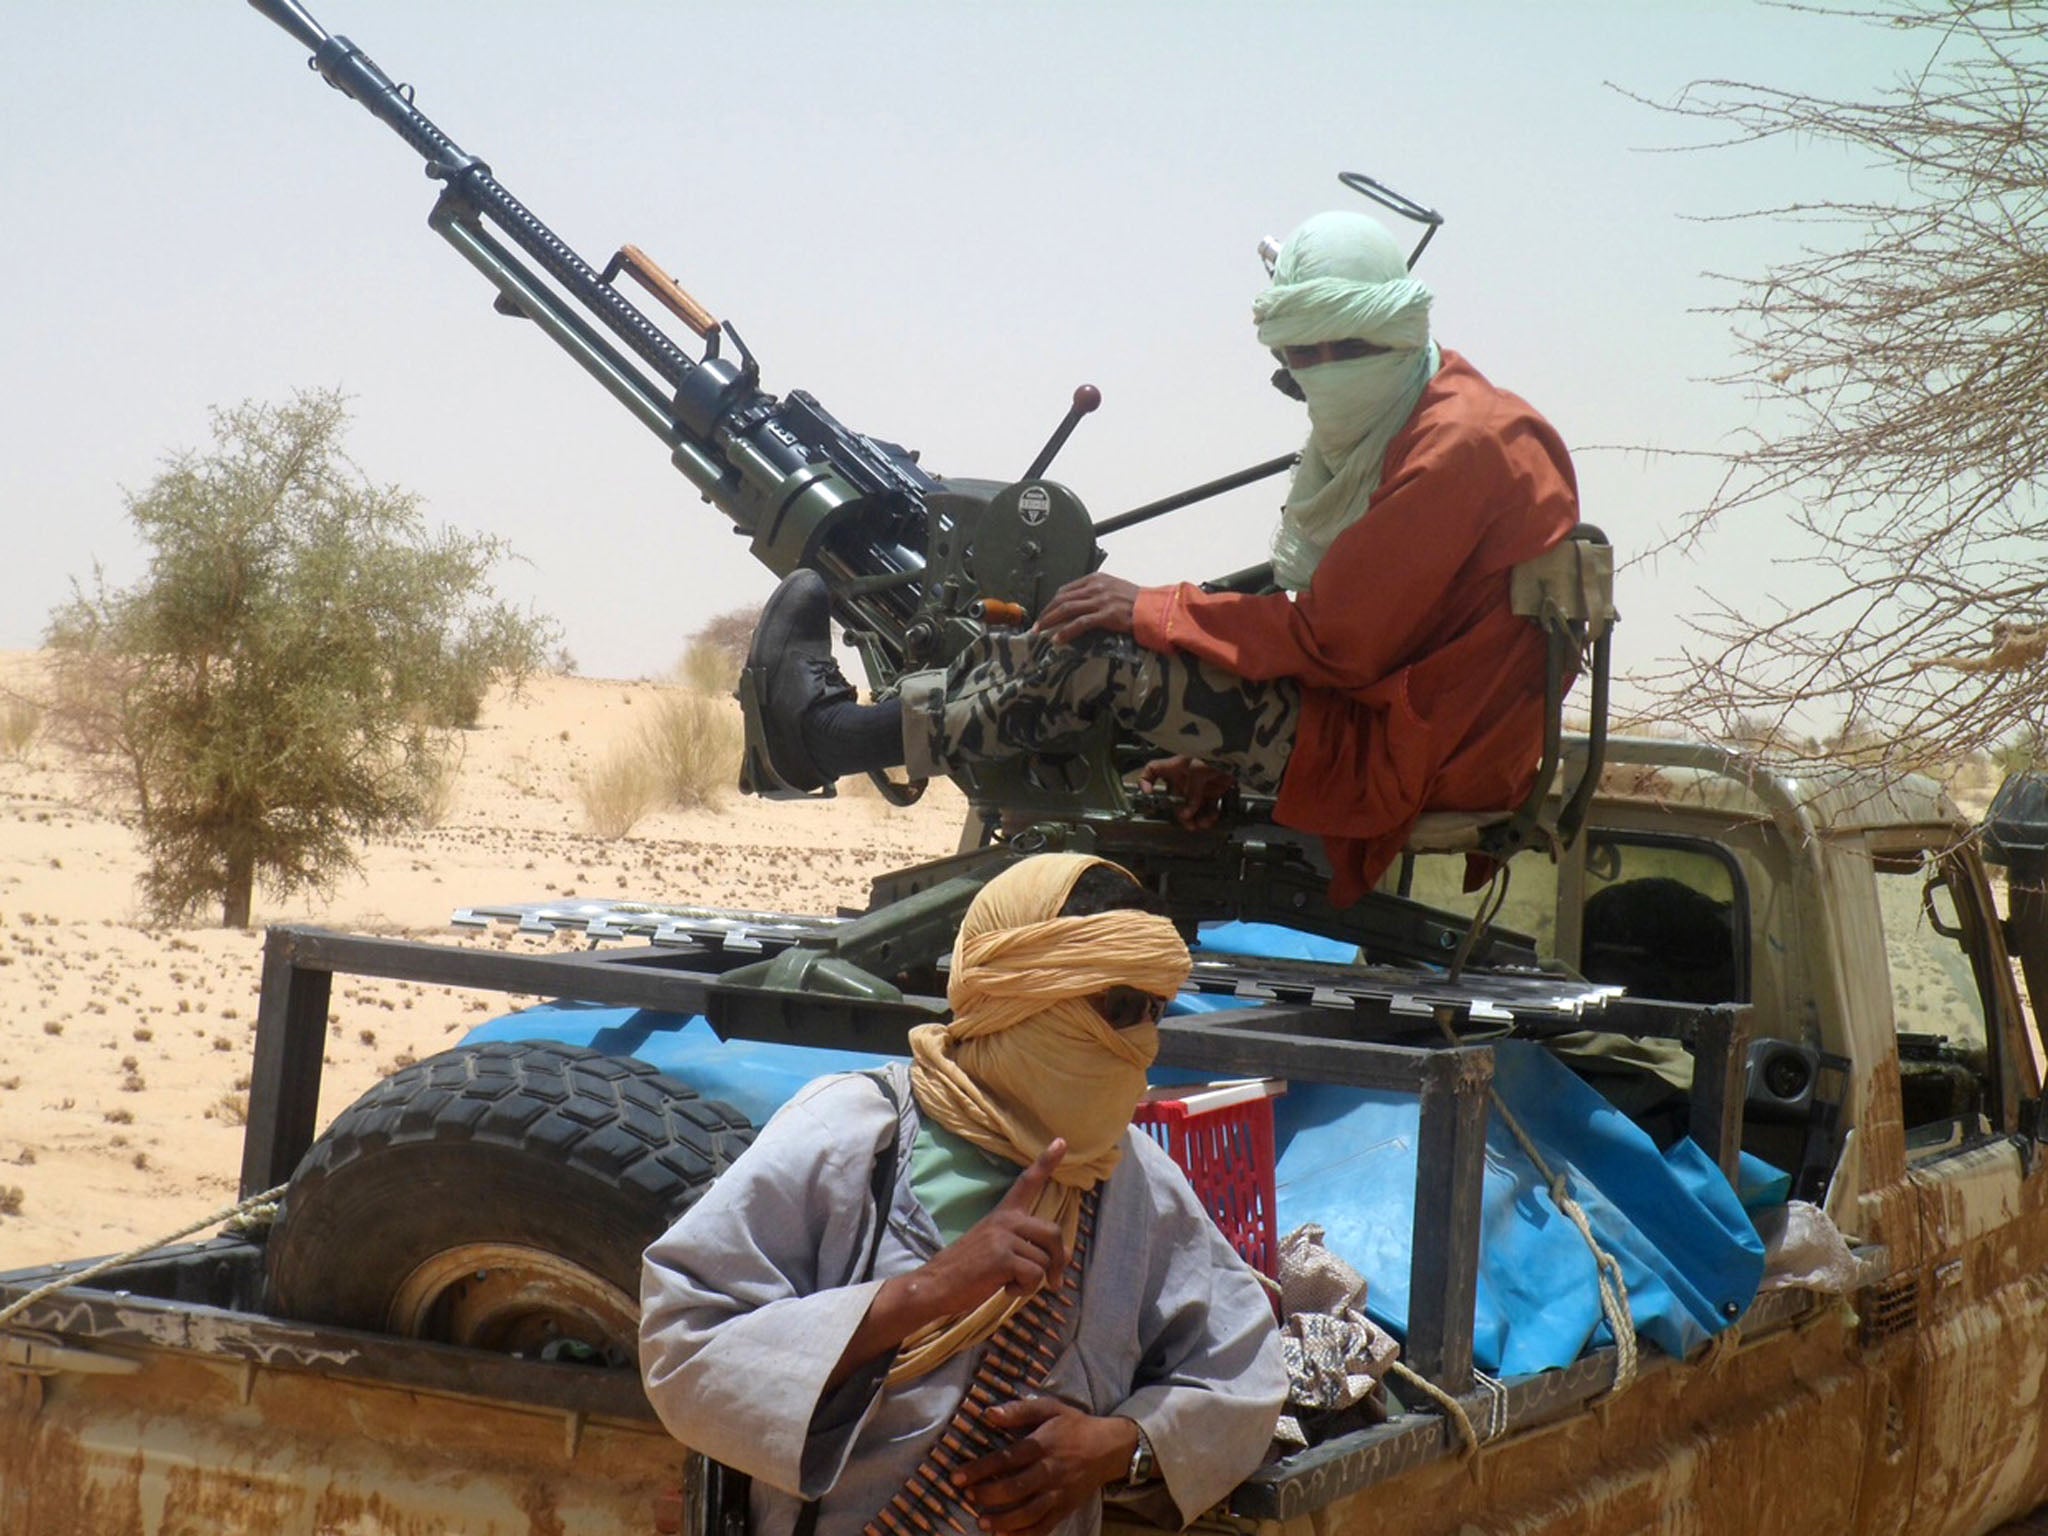 Islamists rebels of Ansar Dine are pictured near Timbuktu, rebel-held northern Mali